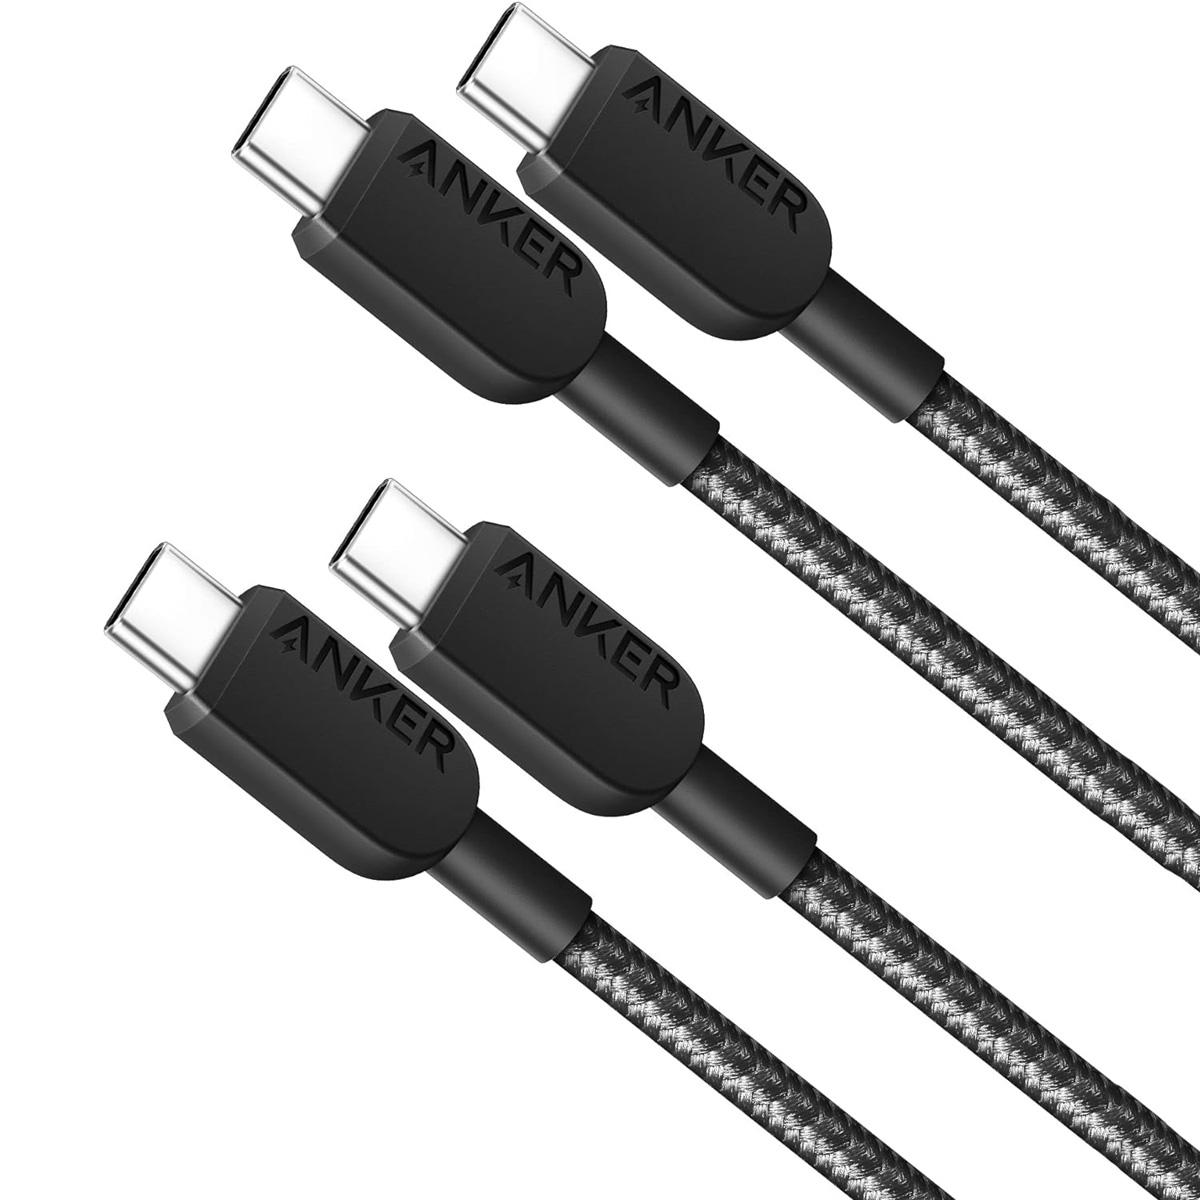 Anker 310 USB C t60W Braided Charging Cables 2 Pack for $5.99